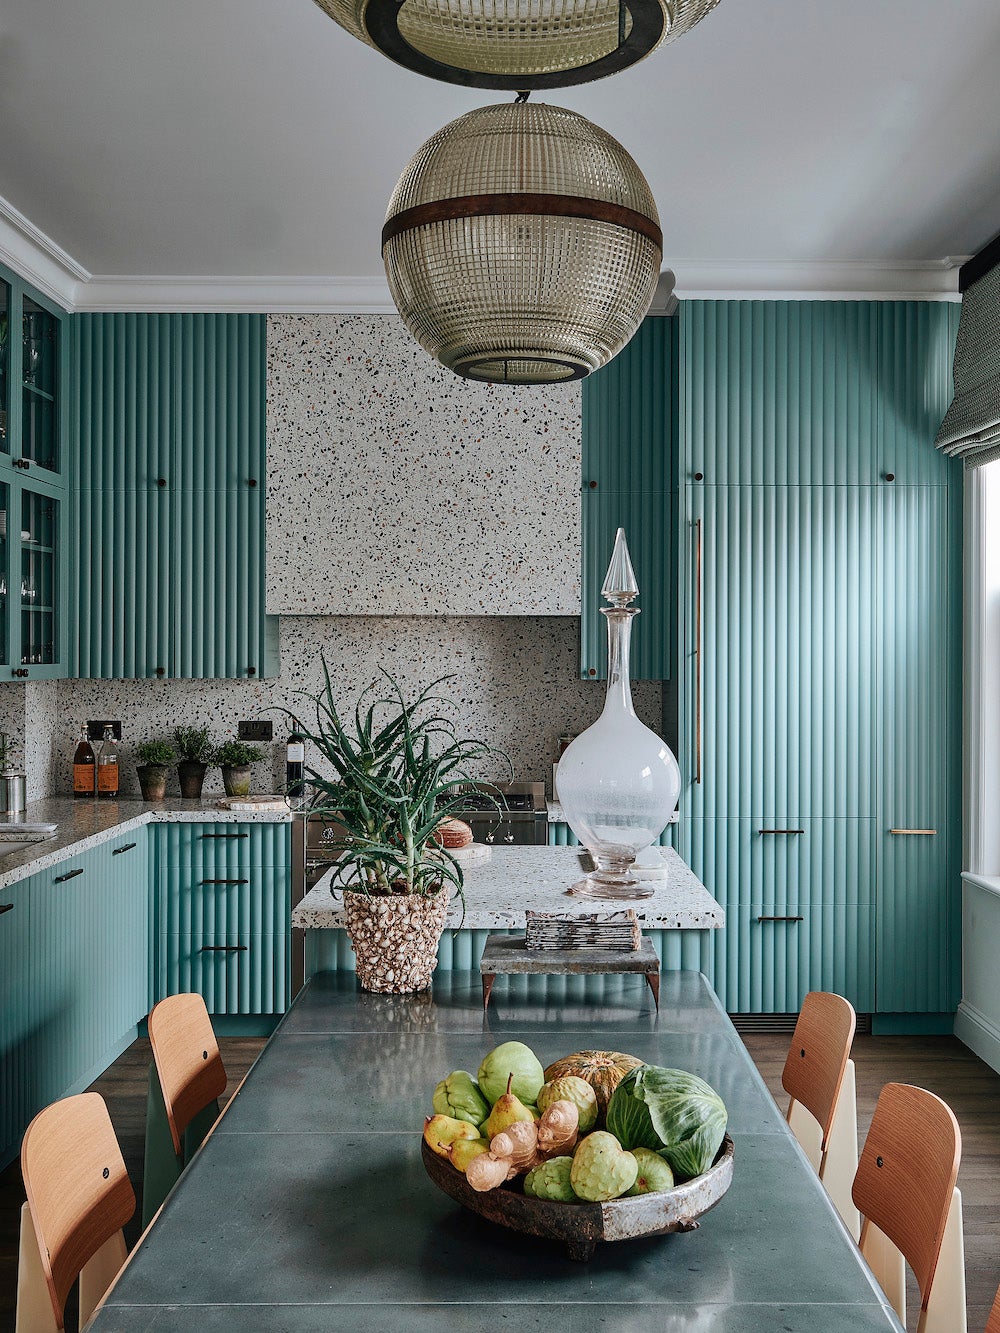 blue ribbed kitchen cabients